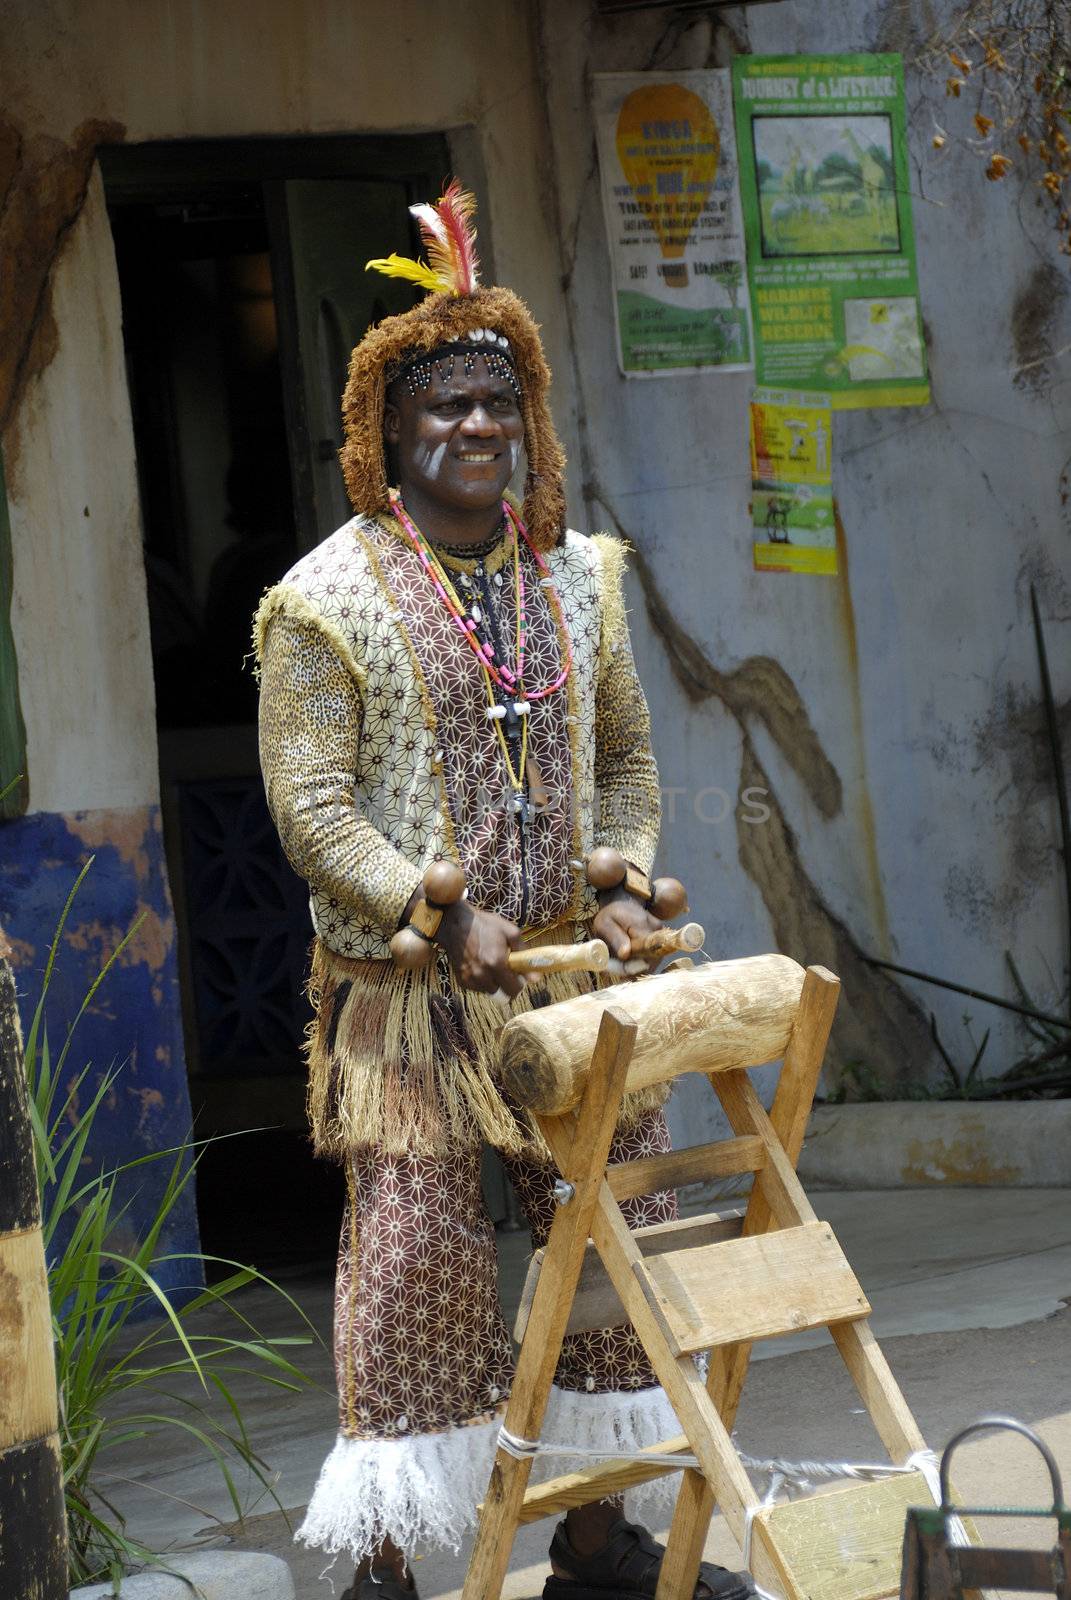 African artist performing on the streets